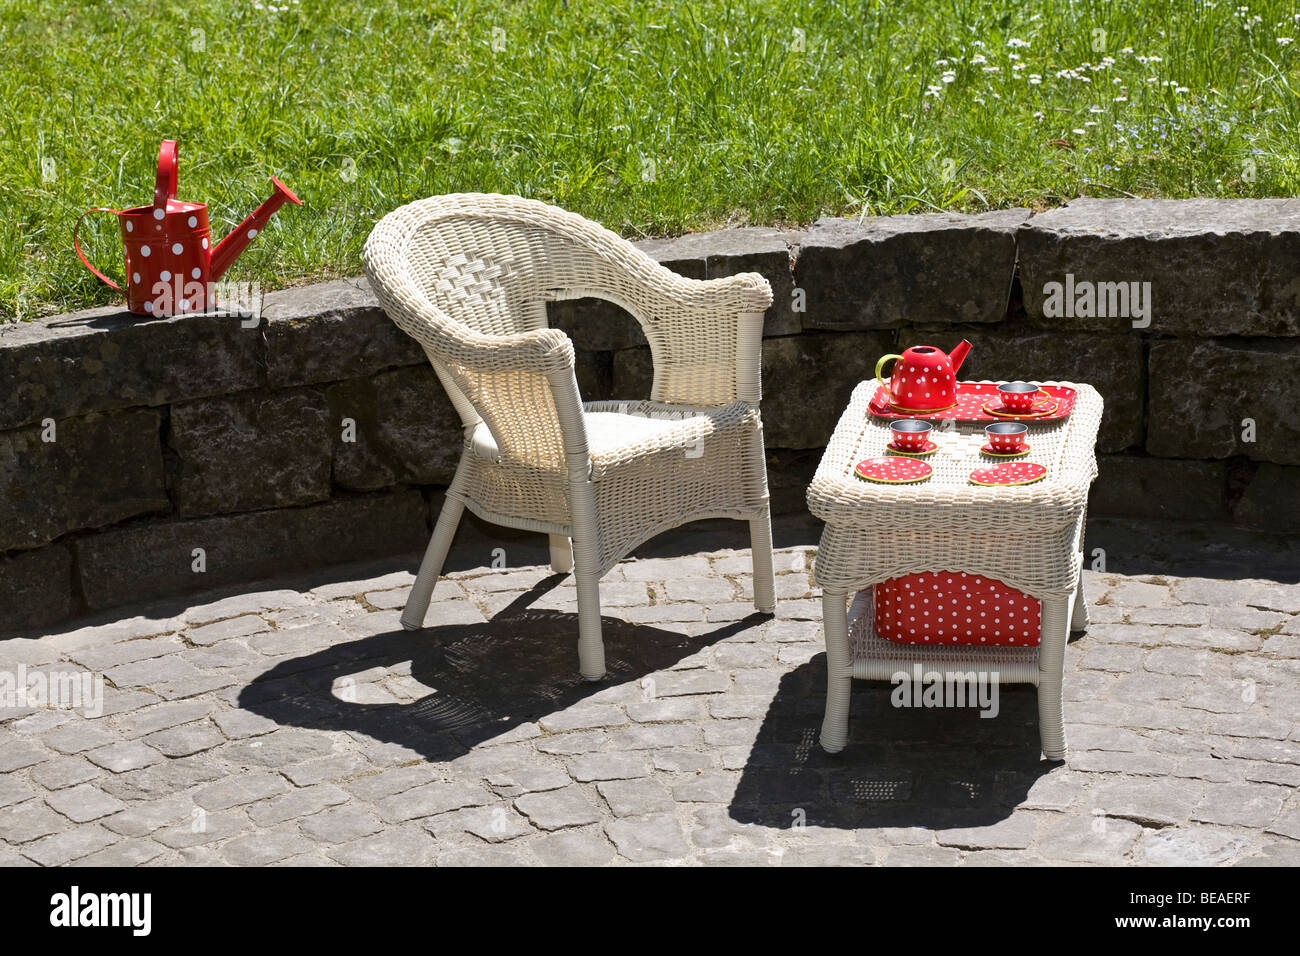 A wicker chair and table with a child's tea set, outdoors Stock Photo